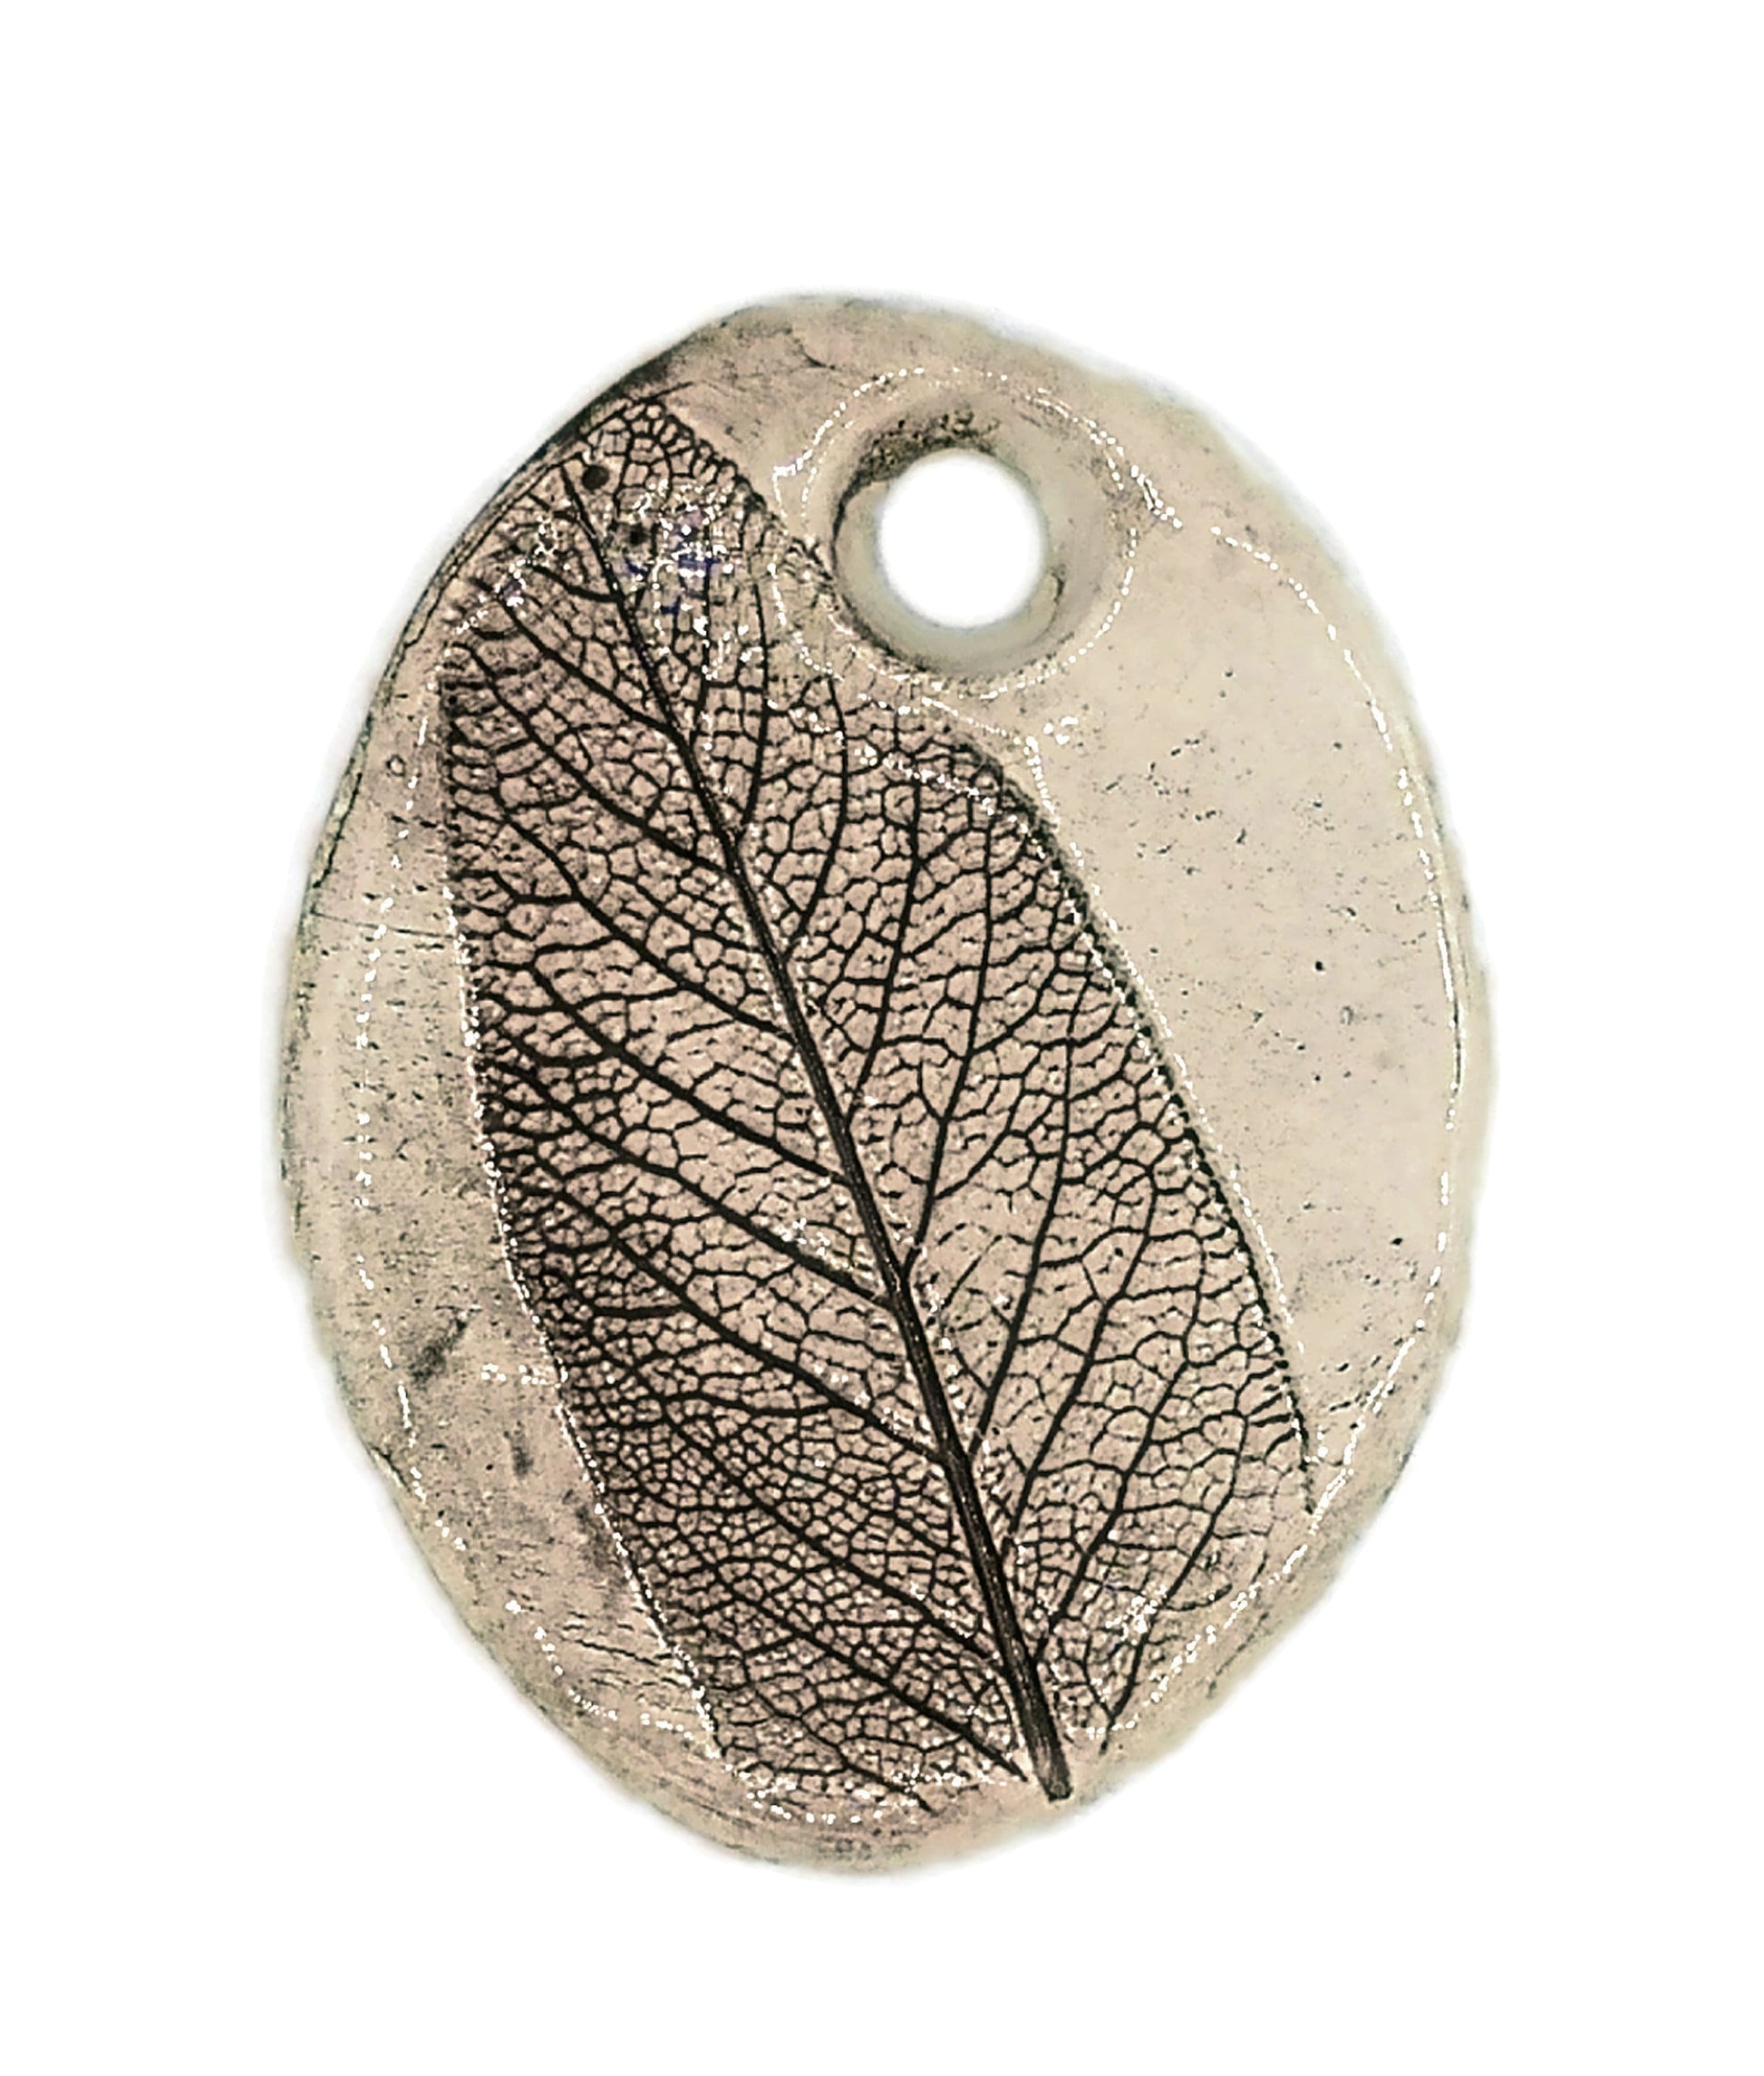 1Pc 85mm Extra Large Handmade Ceramic Necklace Pendant for Jewelry Making, Rustic Pressed Sage Leavf Jumbo Clay Charm For Eclectic Fashion - Ceramica Ana Rafael